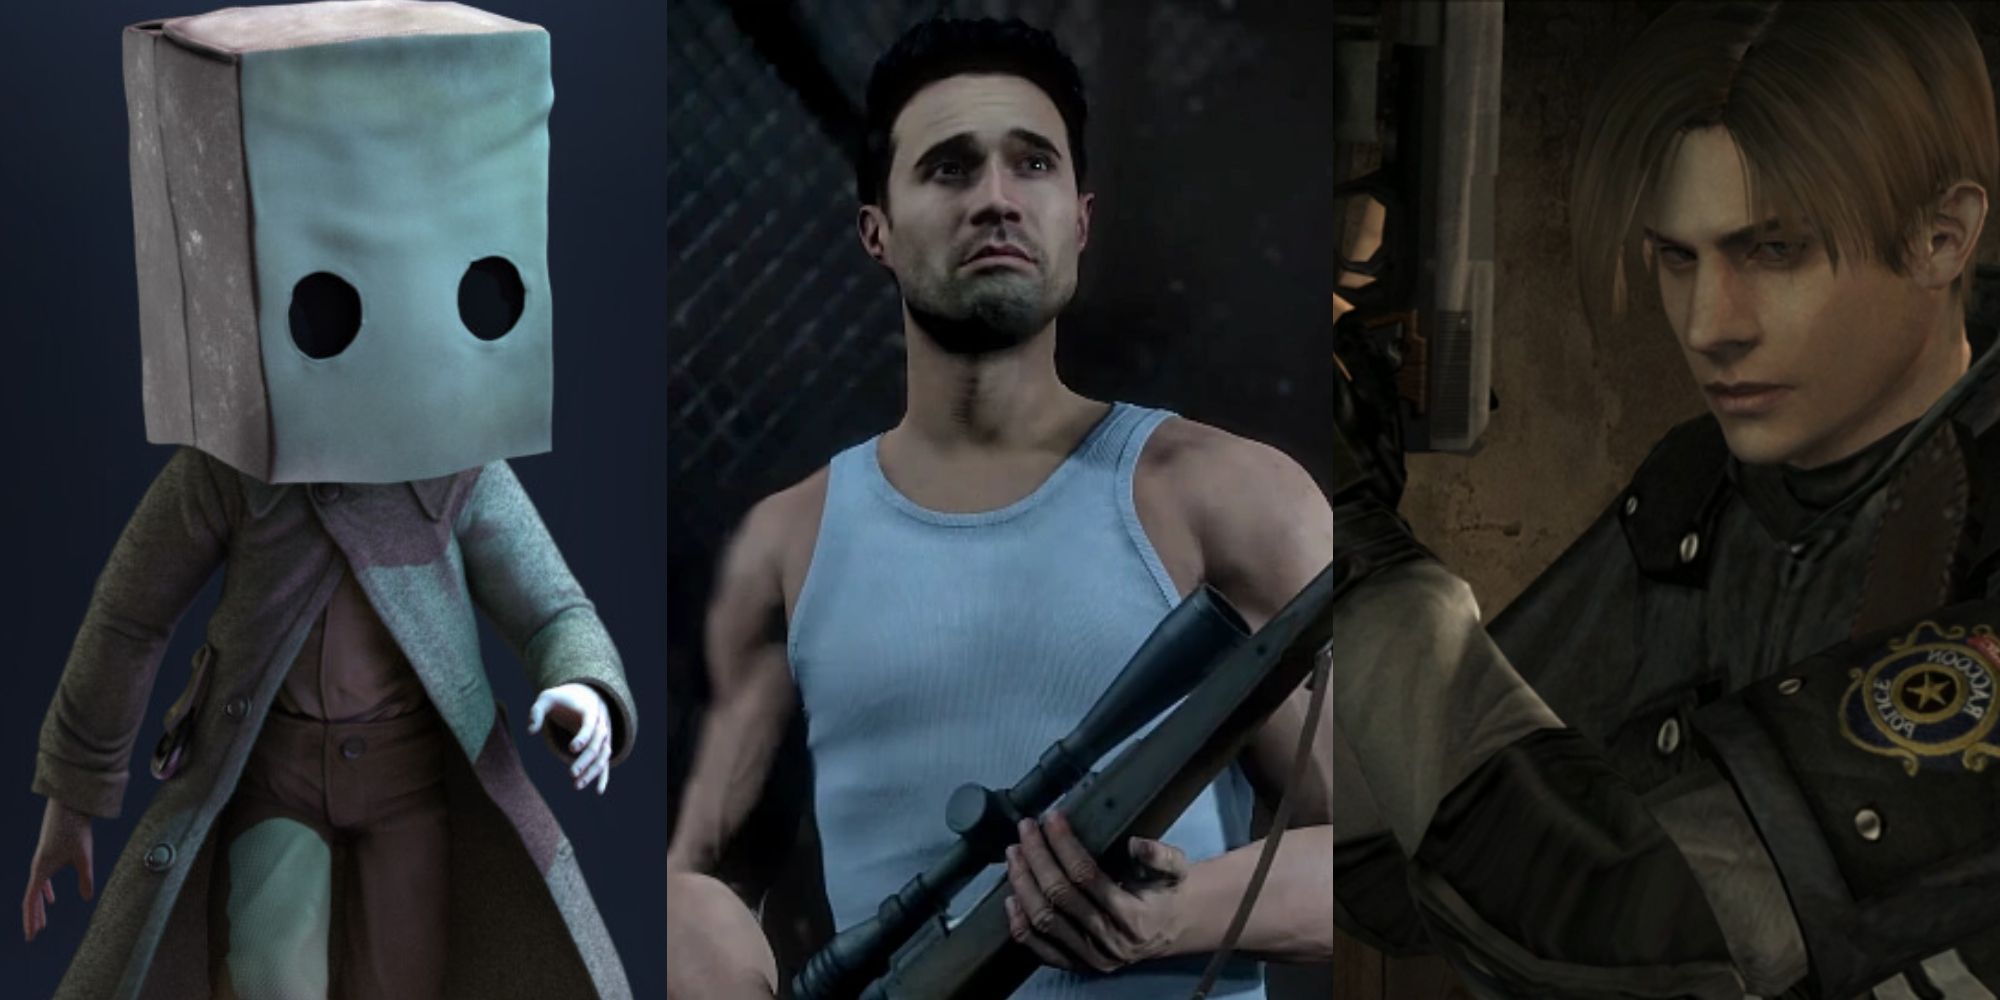 Mono from Little Nightmares II, Mike from Until Dawn and Leon Kennedy from Resident Evil 4